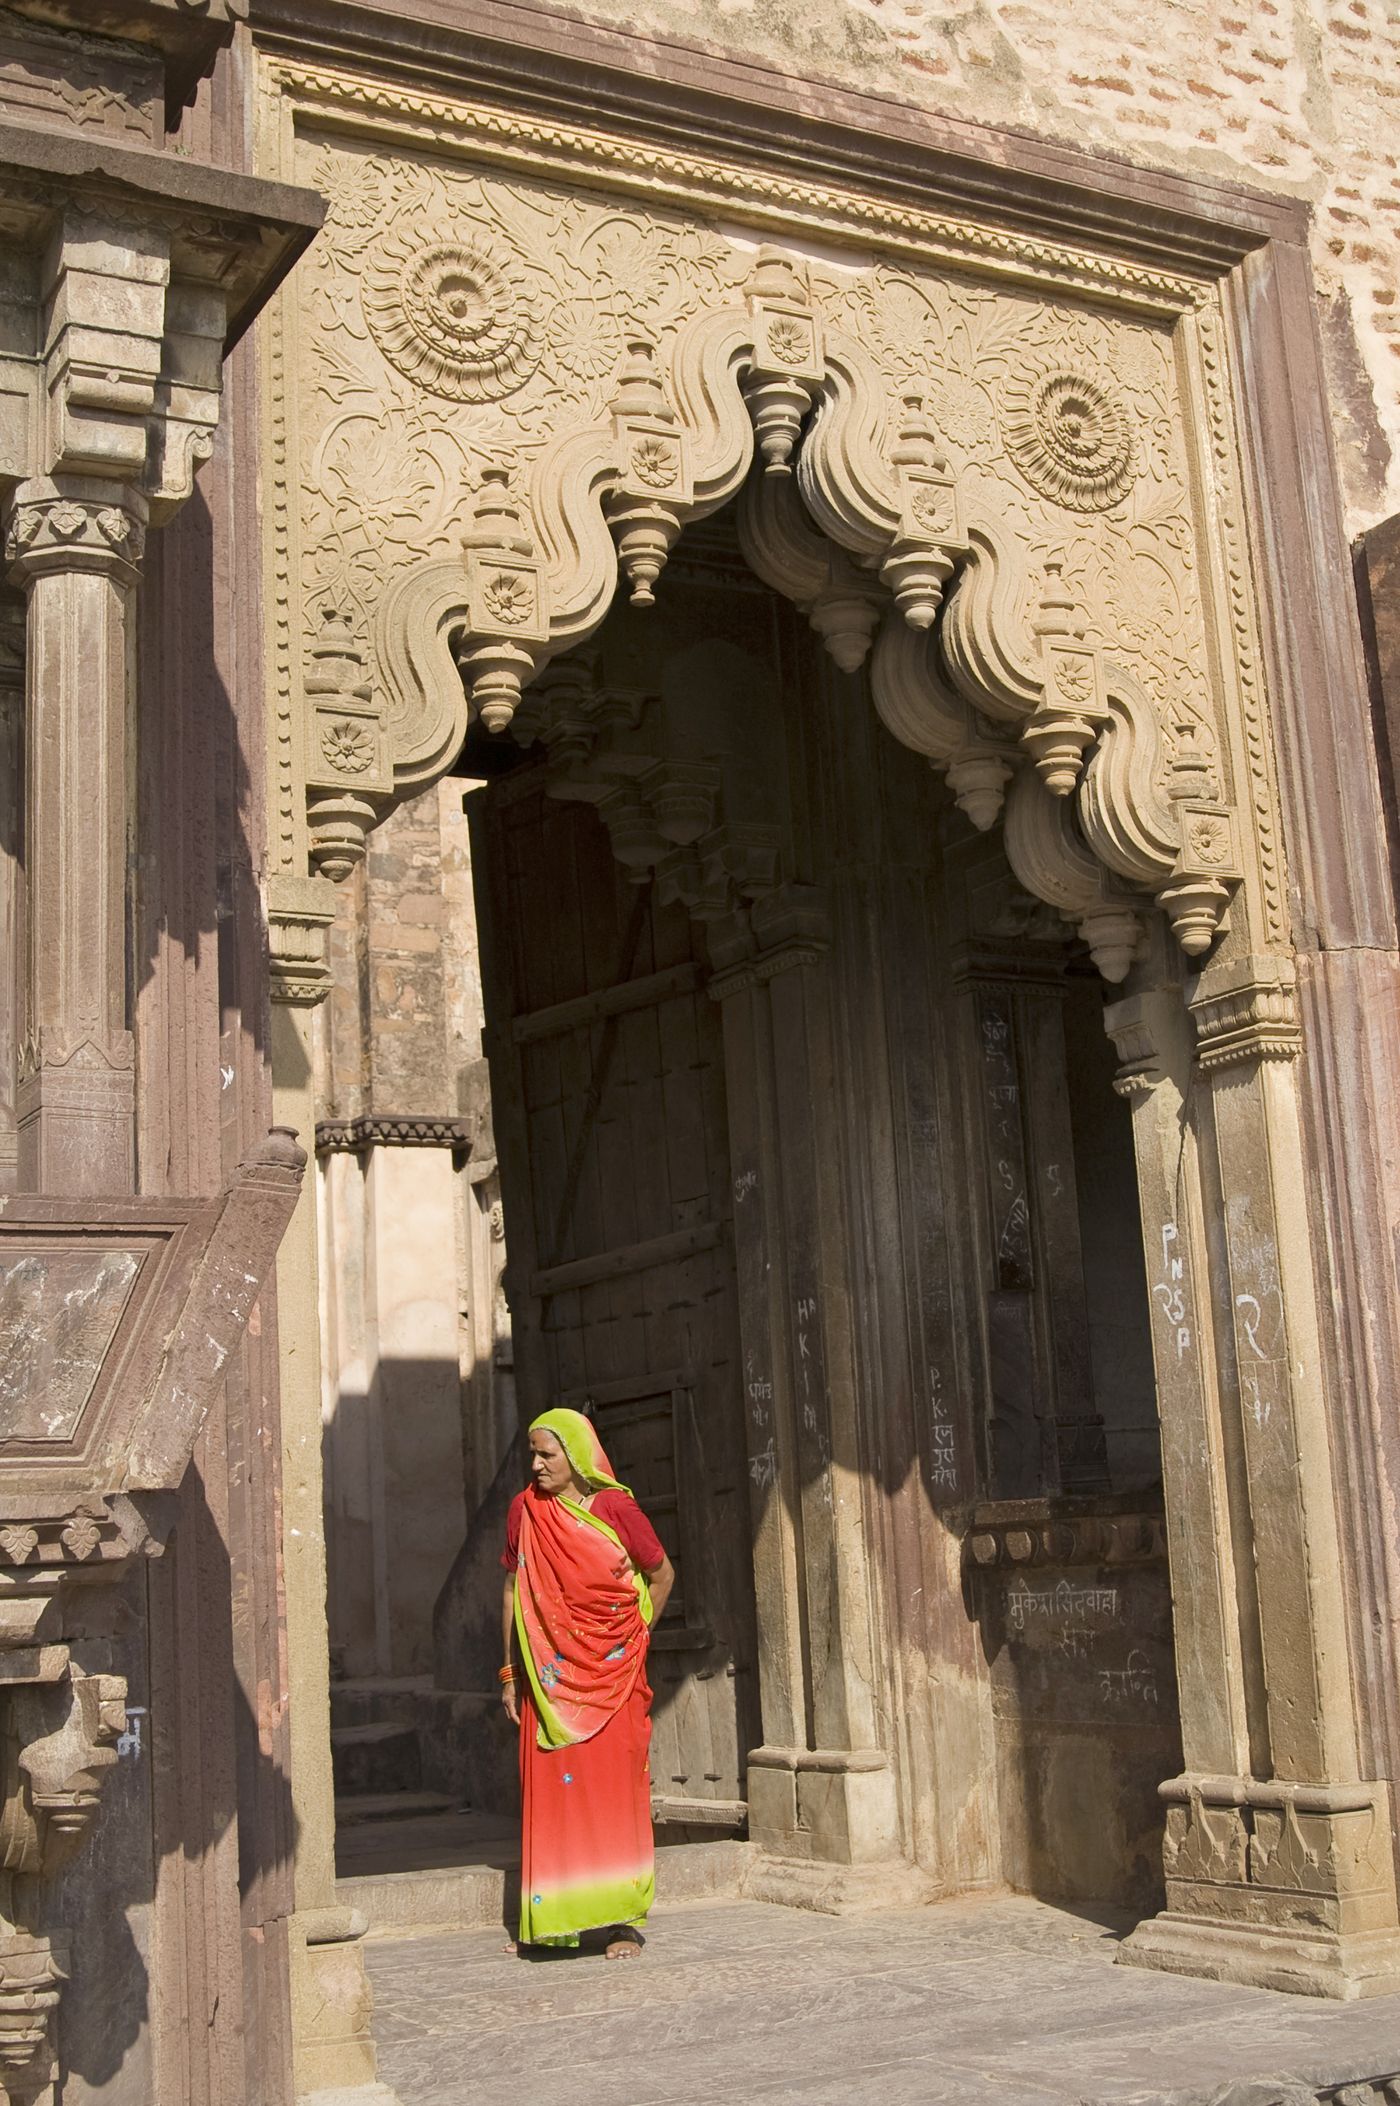 An Indian lady wearing an orange saree, the traditional attire of women in India, leaving a temple in Orchha. Most ancient temples in Orchha were built hundreds of years ago and are still pretty popular 